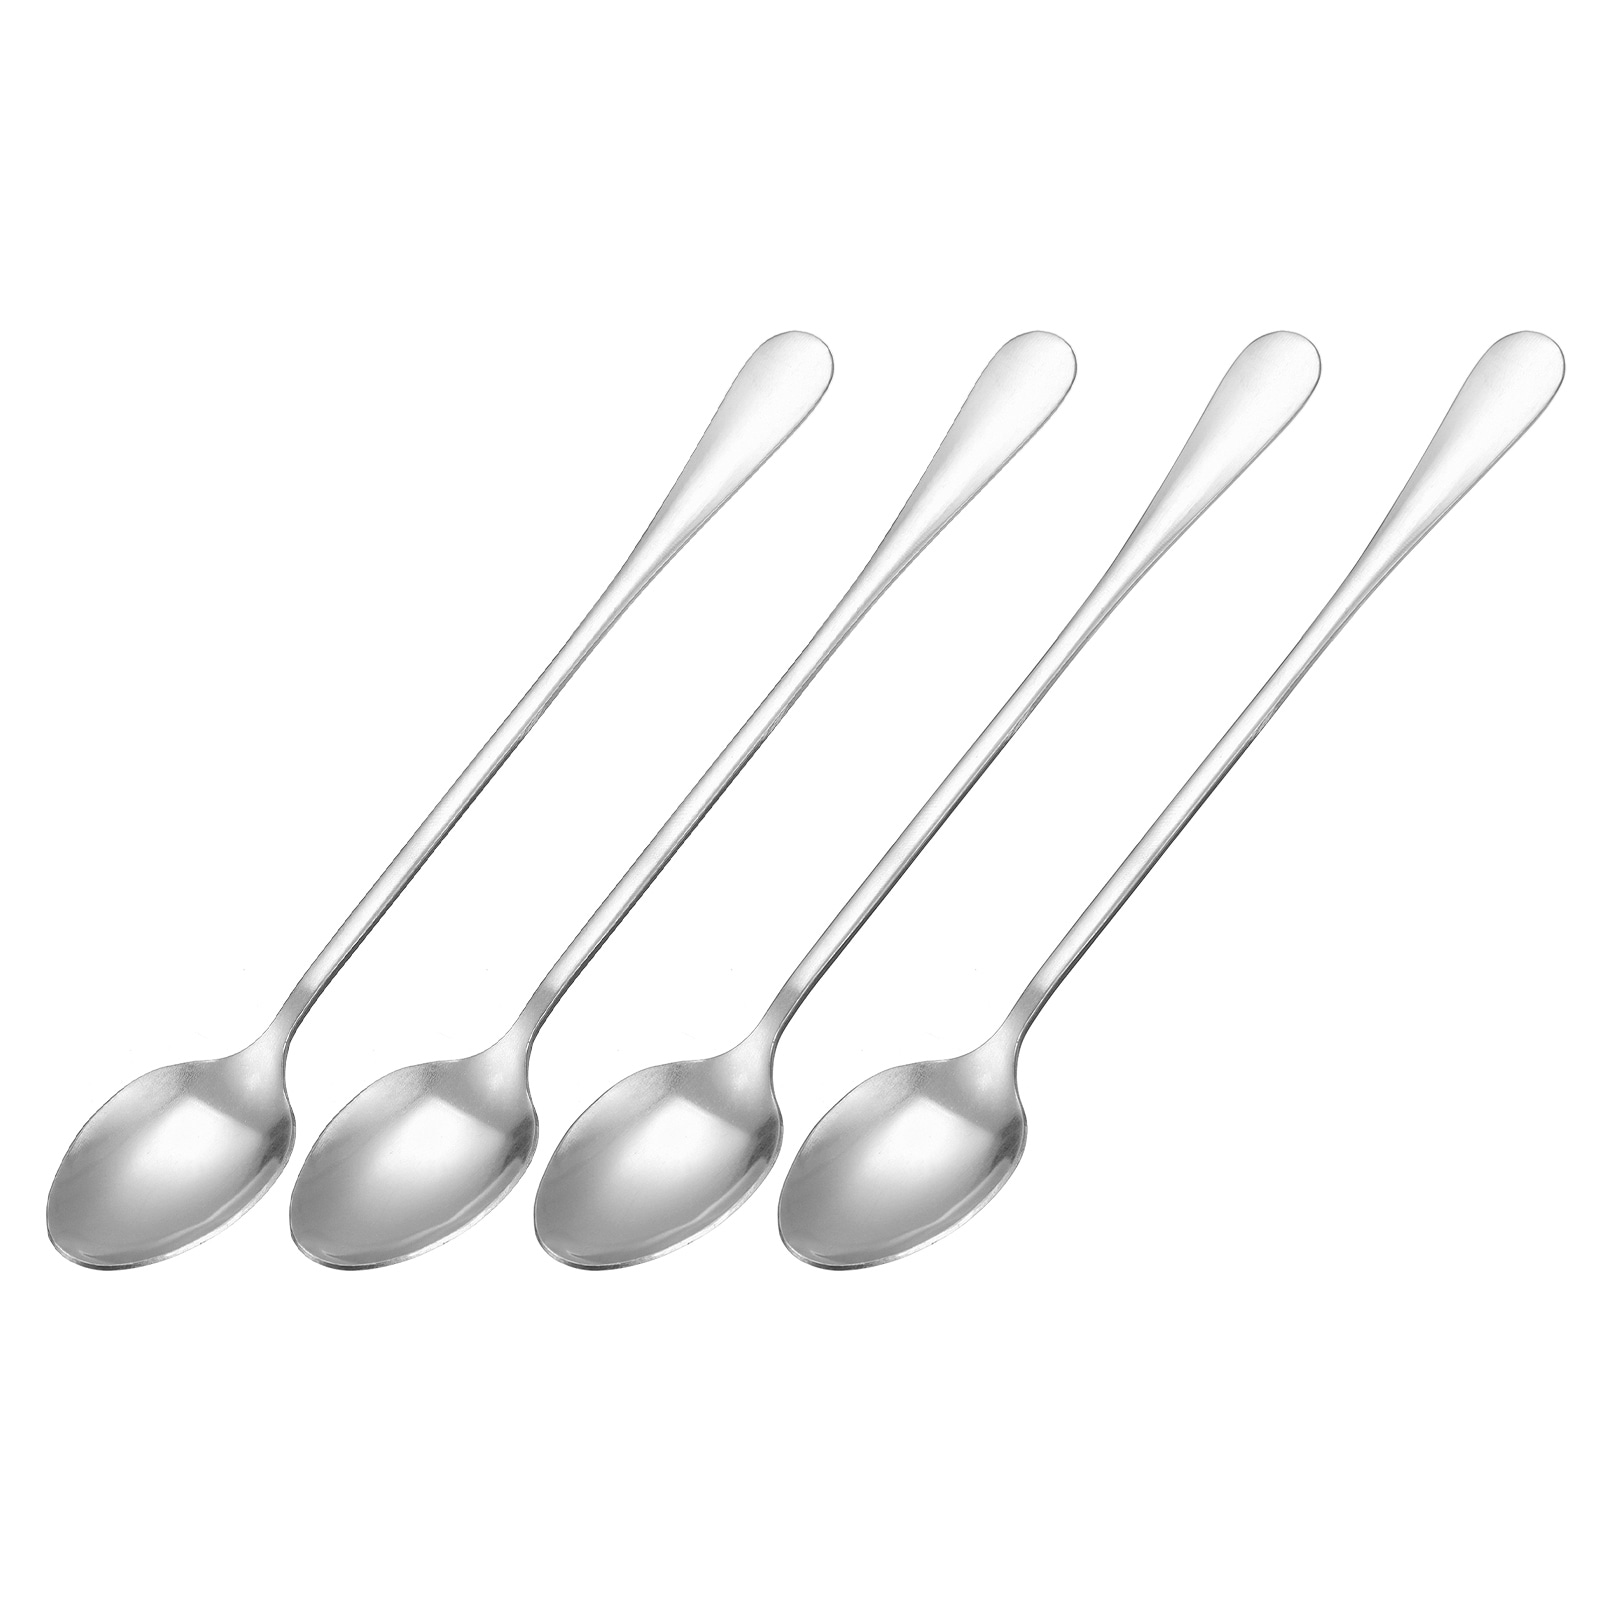 https://ak1.ostkcdn.com/images/products/is/images/direct/ddae92917b59fcb3ad56b912f1da60ff31533889/4Pcs-7.5-Inch-Stainless-Steel-Ice-Cream-Spoon-Long-Handle-Spoon.jpg